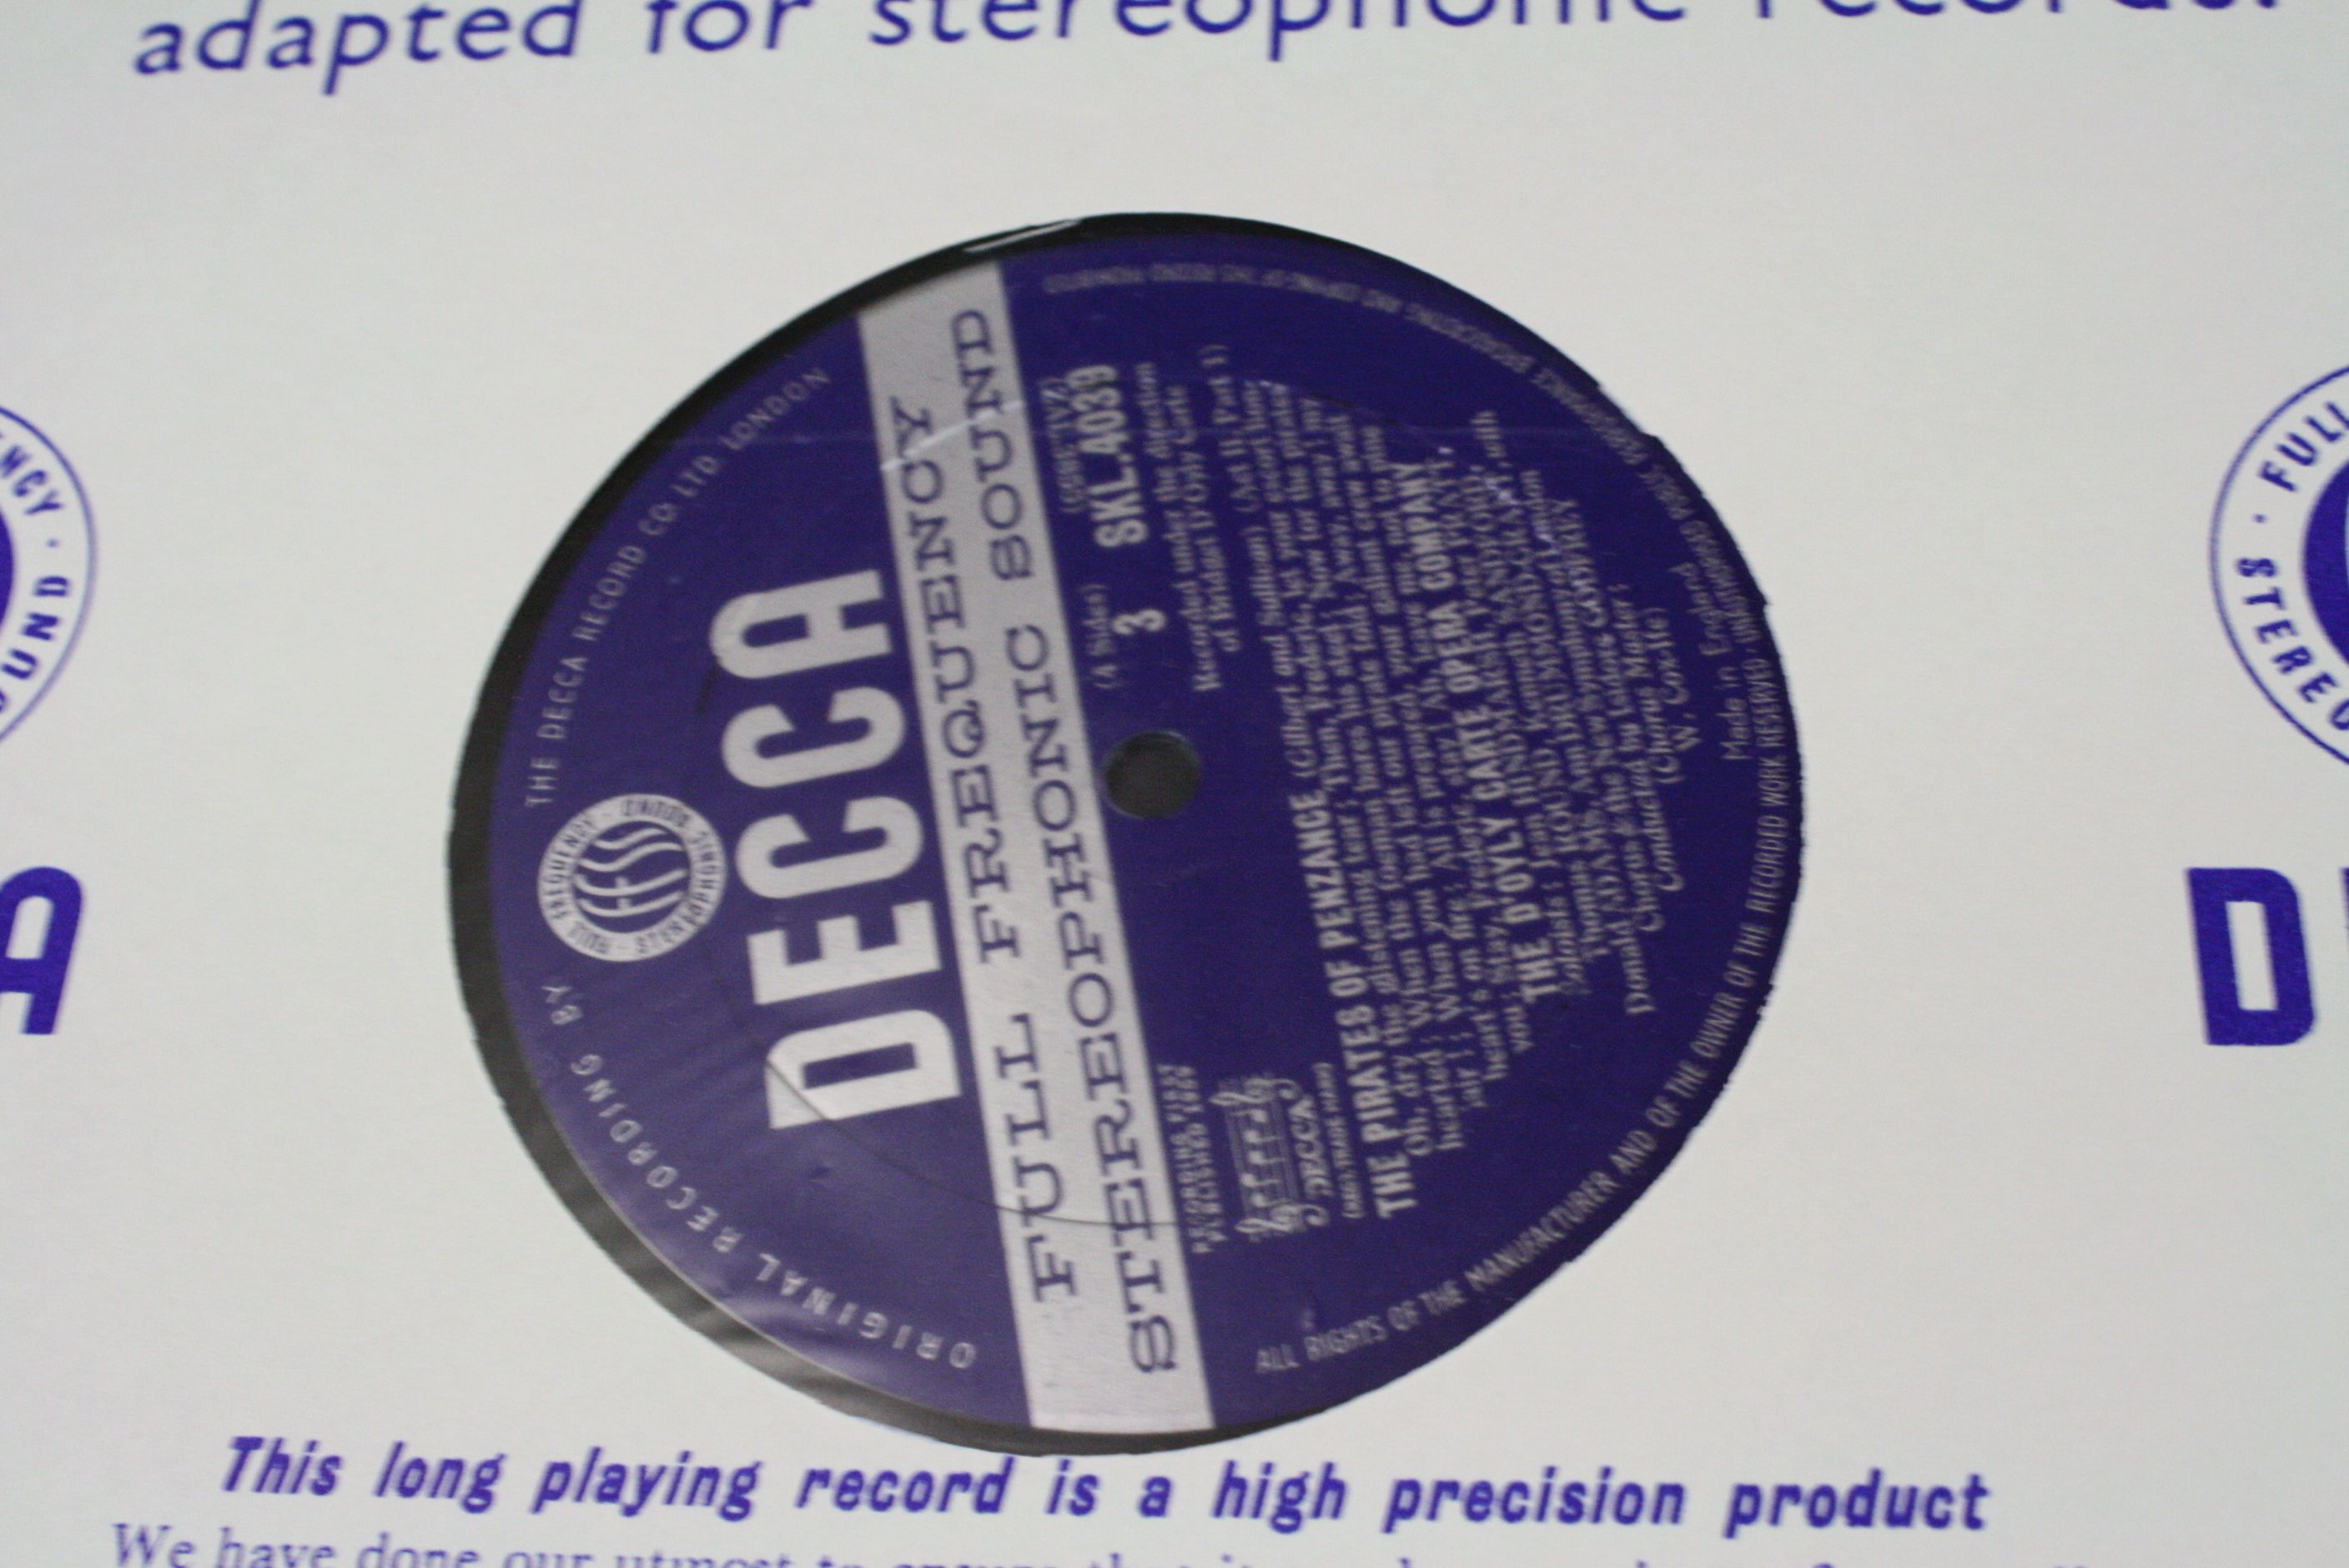 Vinyl - Vinyl Records - Classical - 7 Original ED 1 Stereo albums and Two 10” on Decca Records, - Image 18 of 27